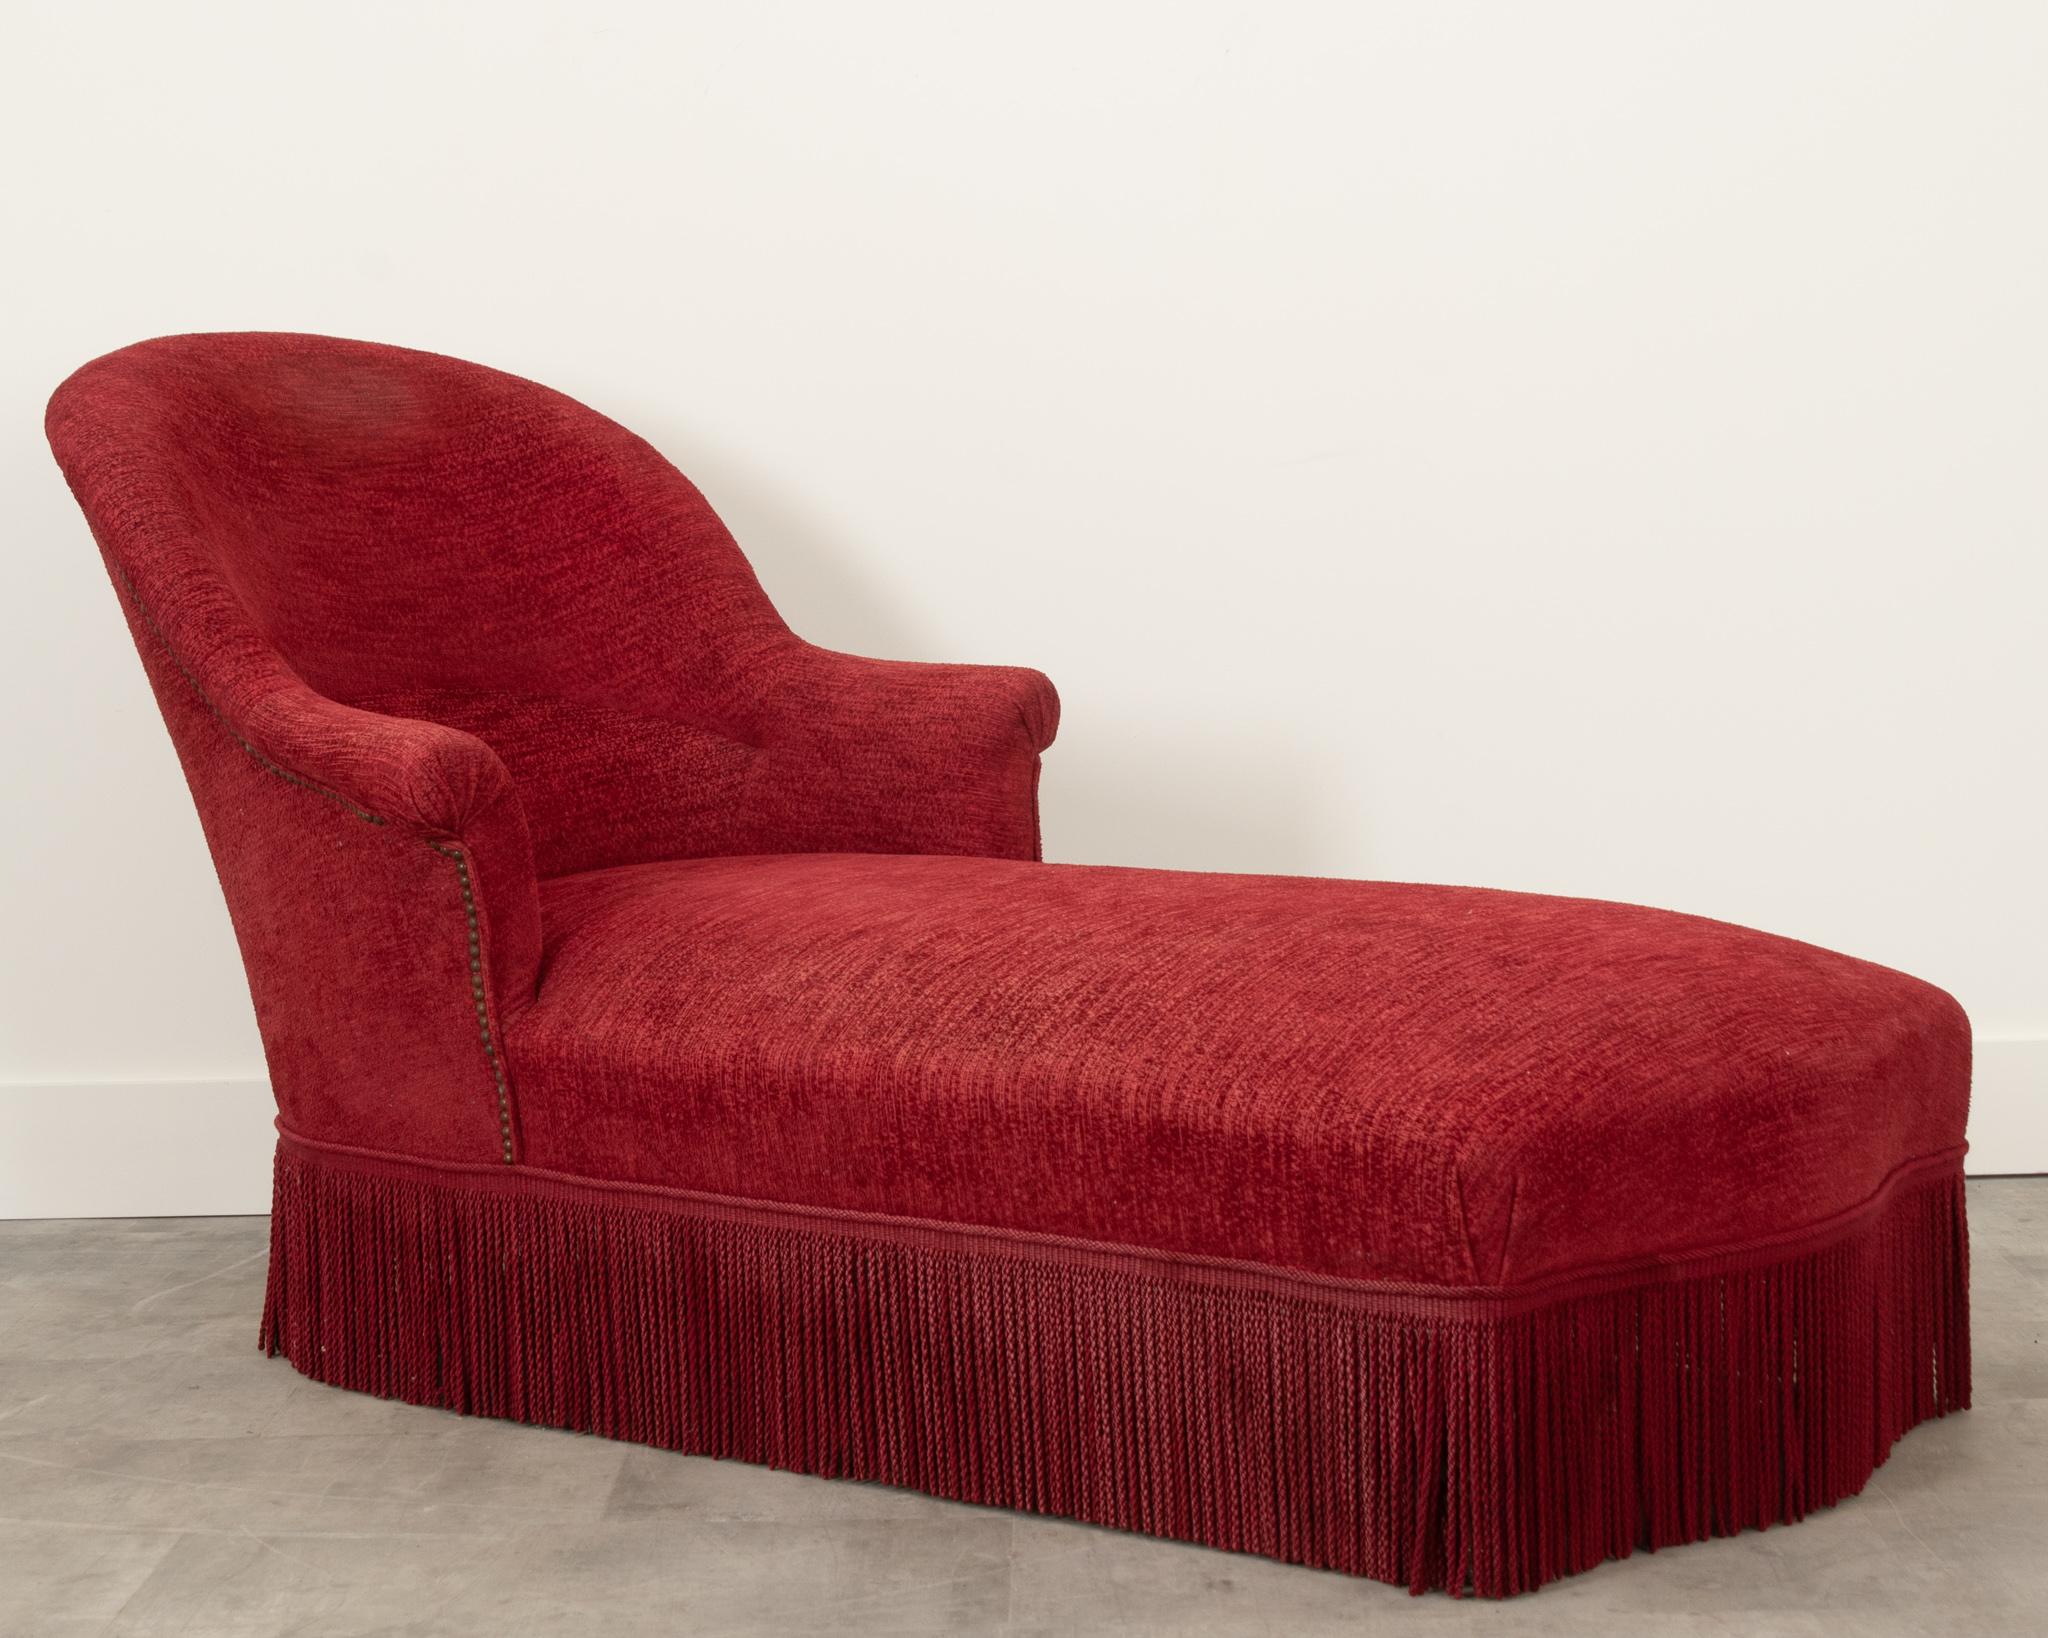 A beautiful eye-catching red textured velvet chaise with a classic shape and fringe around the bottom to hide the turned wooden feet. The perfect combination of comfort and composition, this chaise would go perfectly in any living space. The